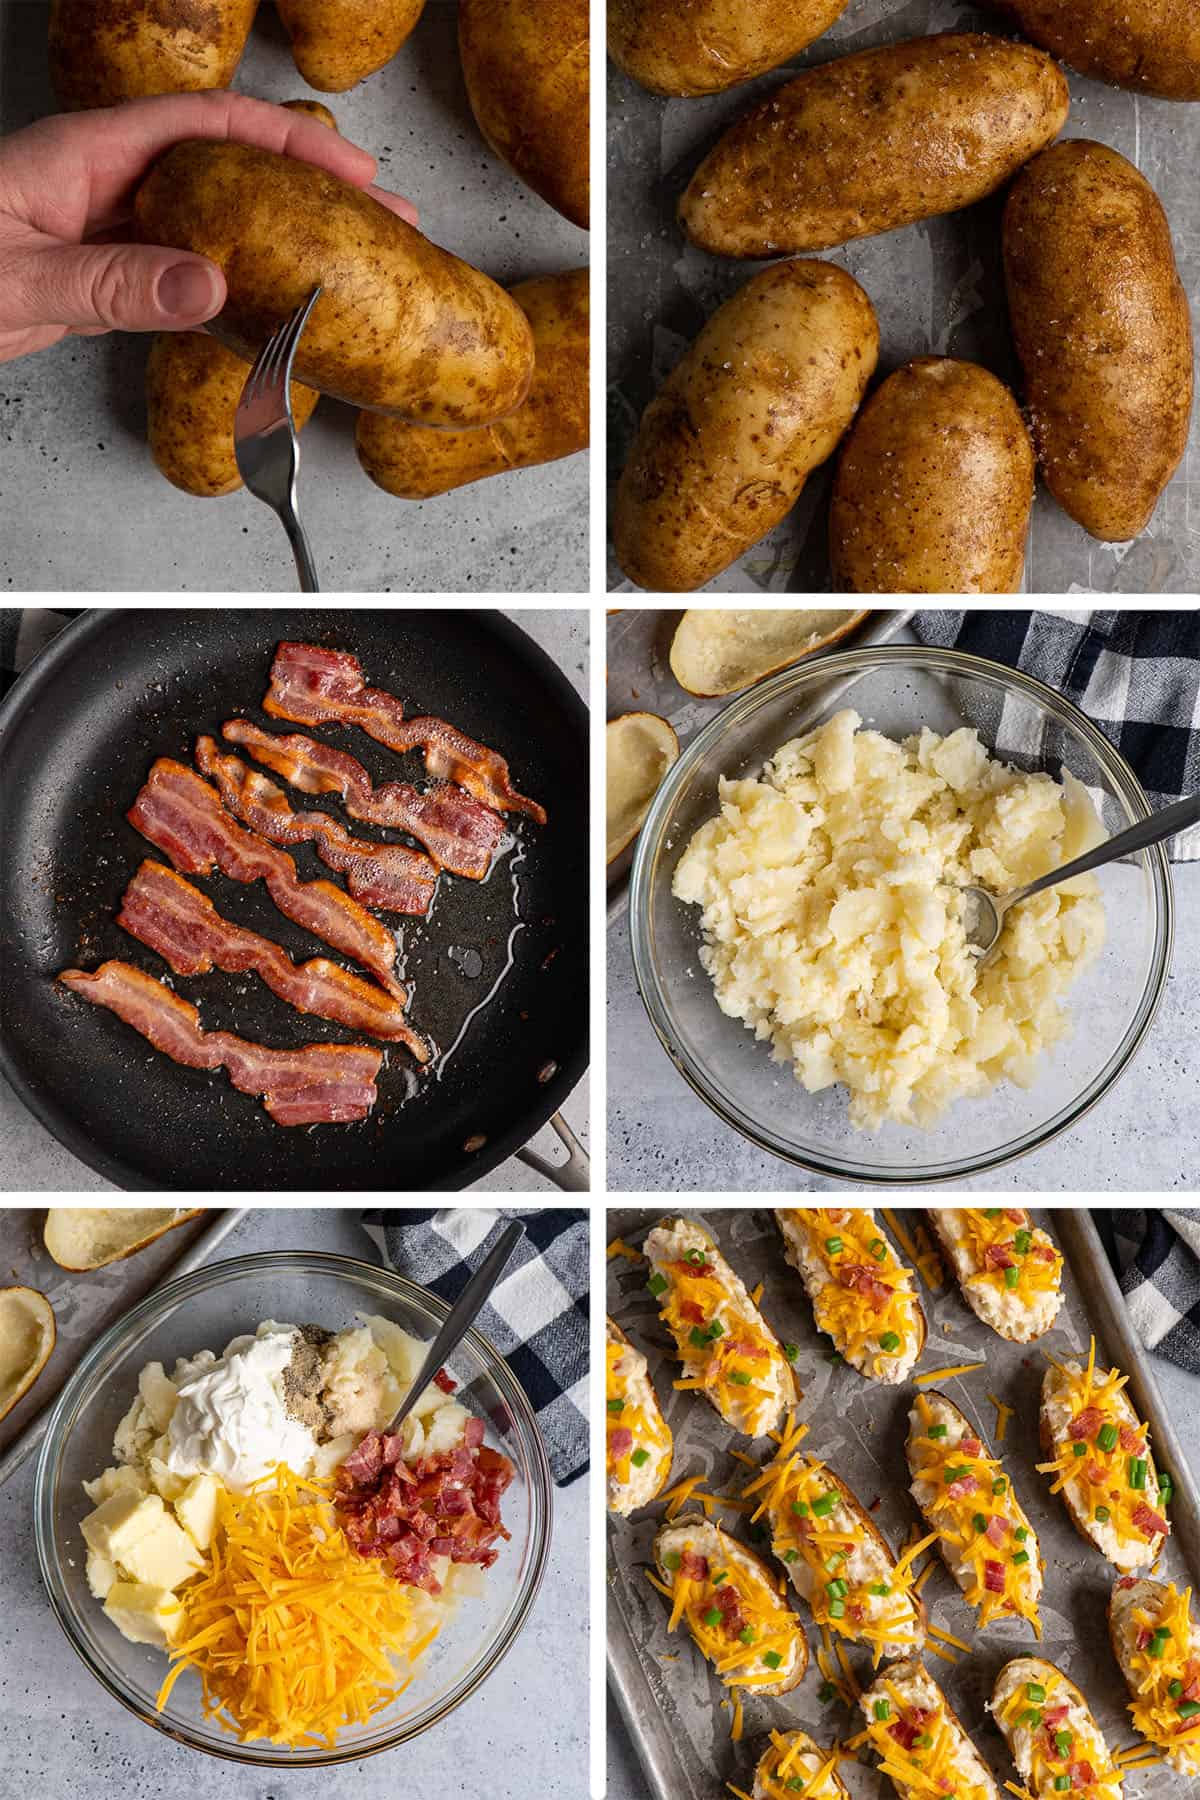 All the steps to make twice baked potatoes.